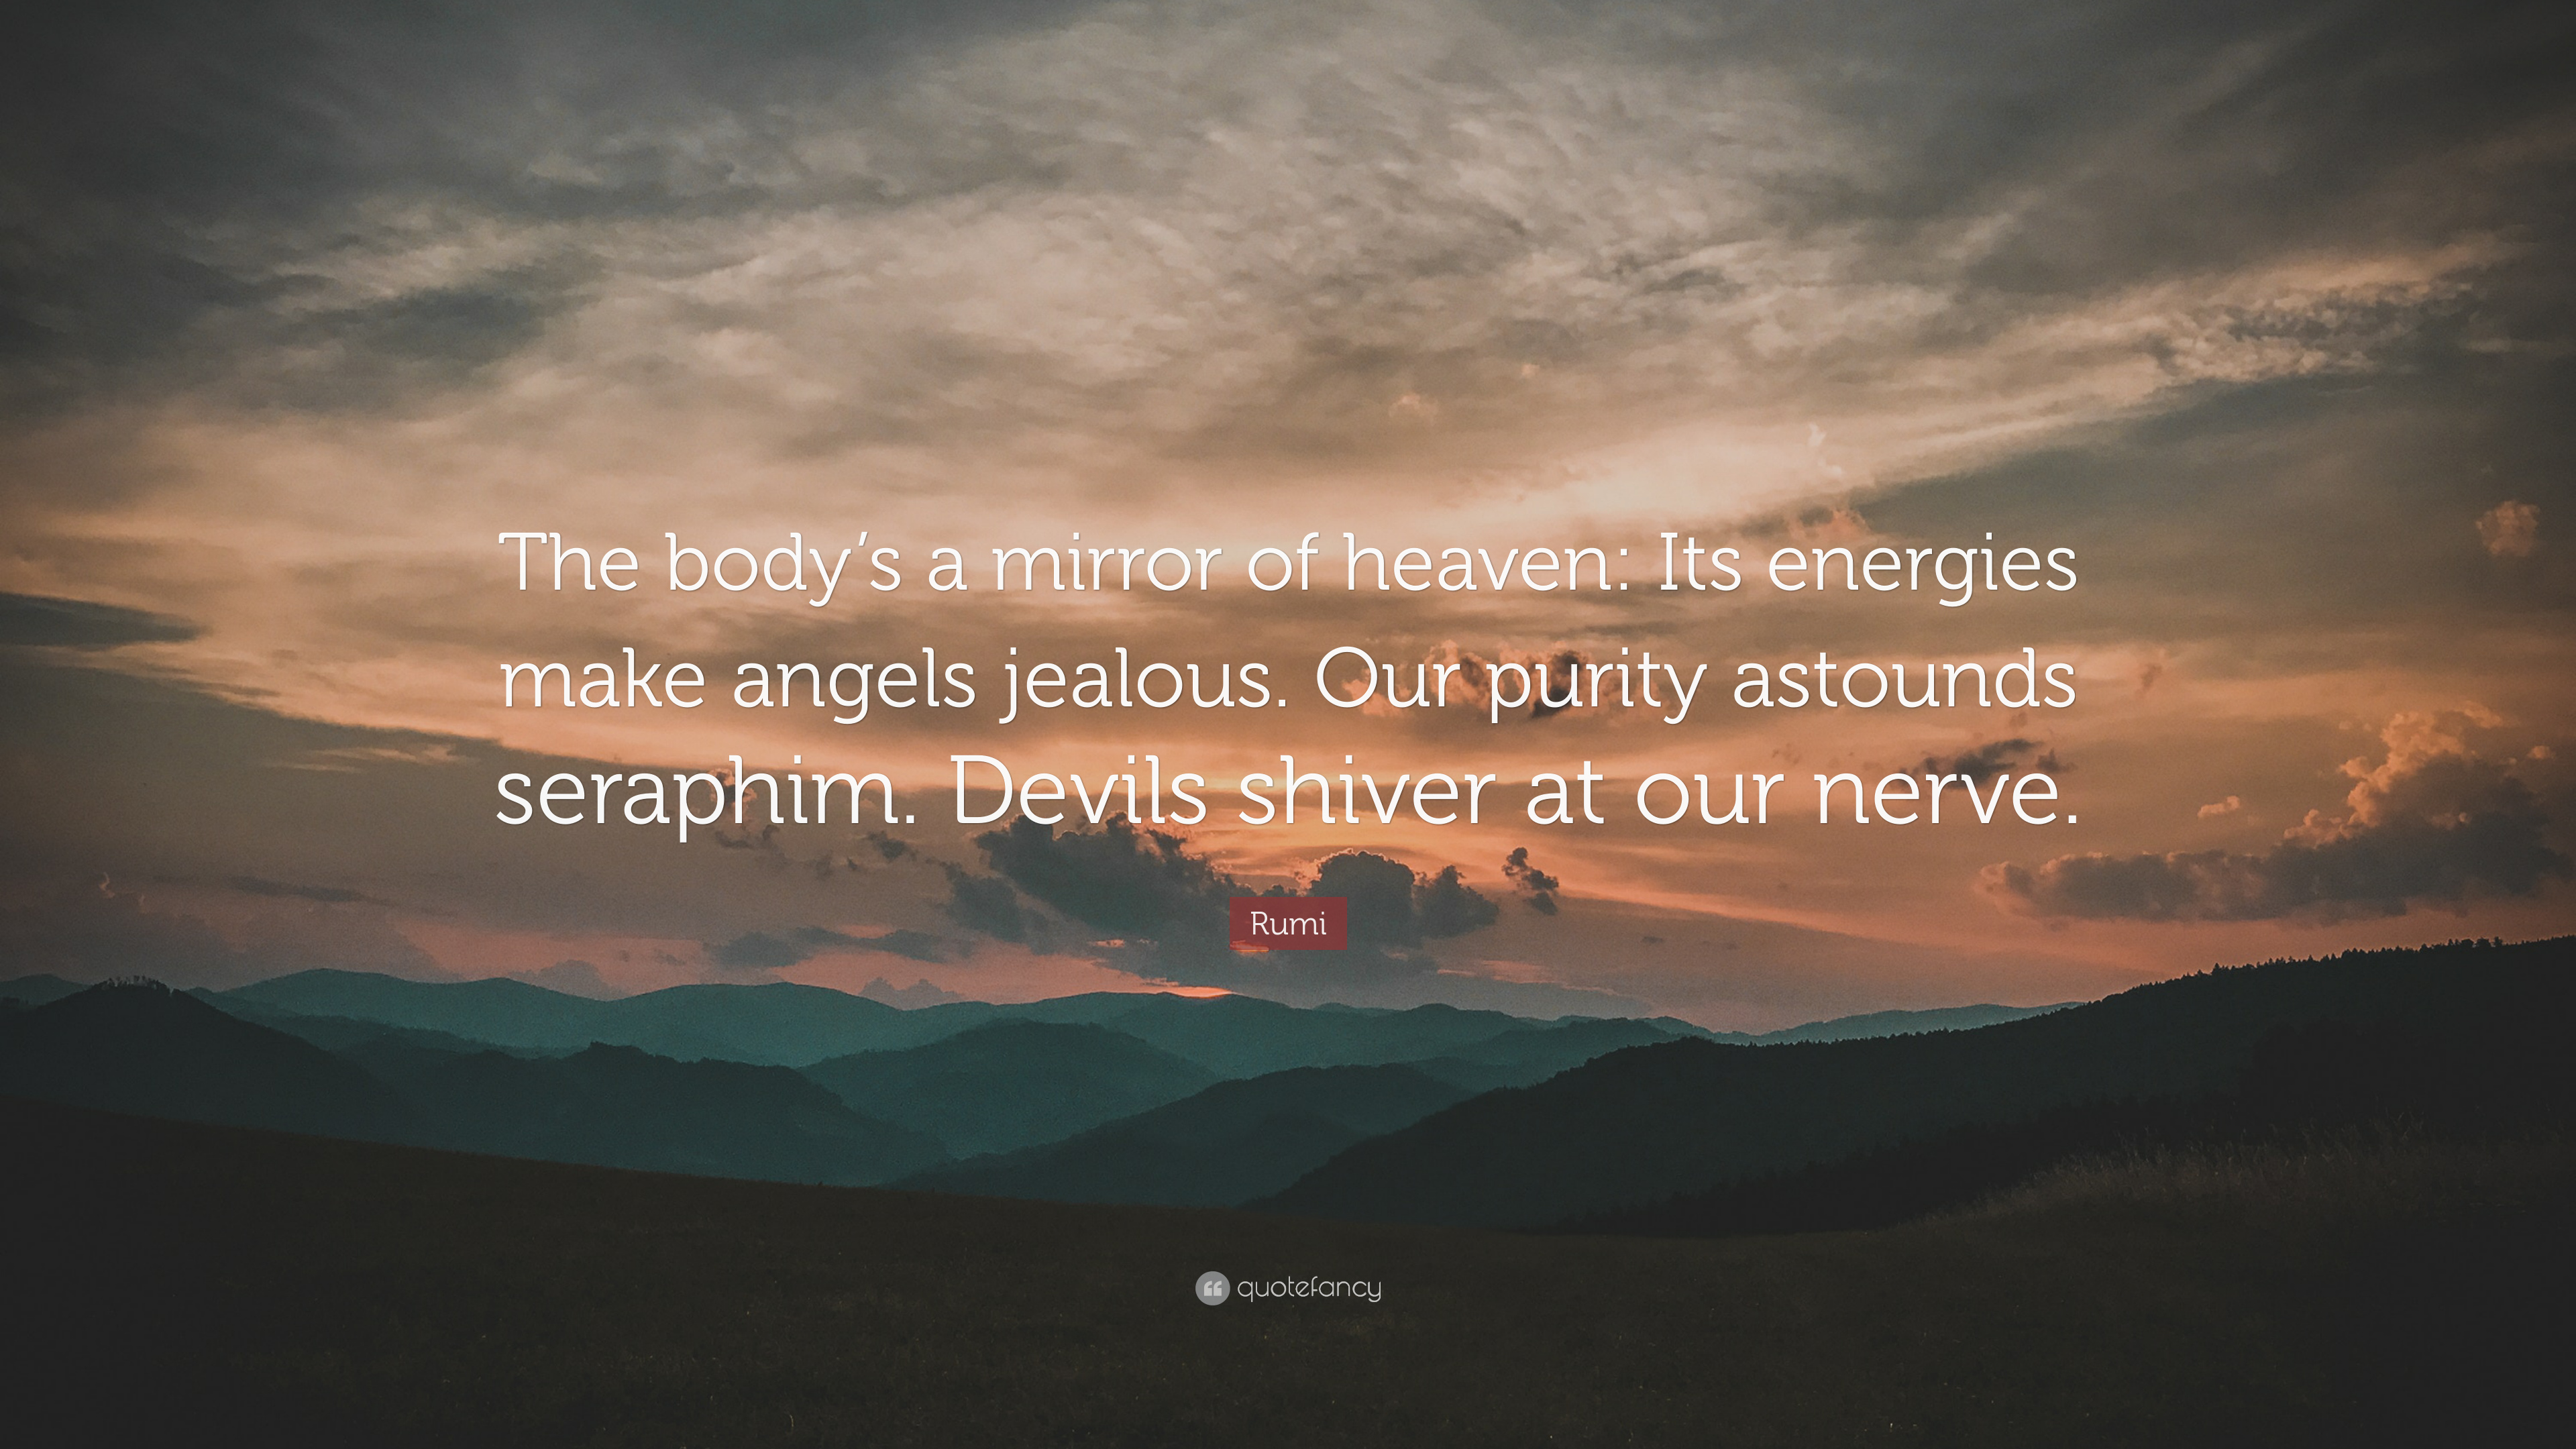 the body’s a mirror of heaven its energies make angels jealous. our purity astounds seraphim. devils shiver at our nerve